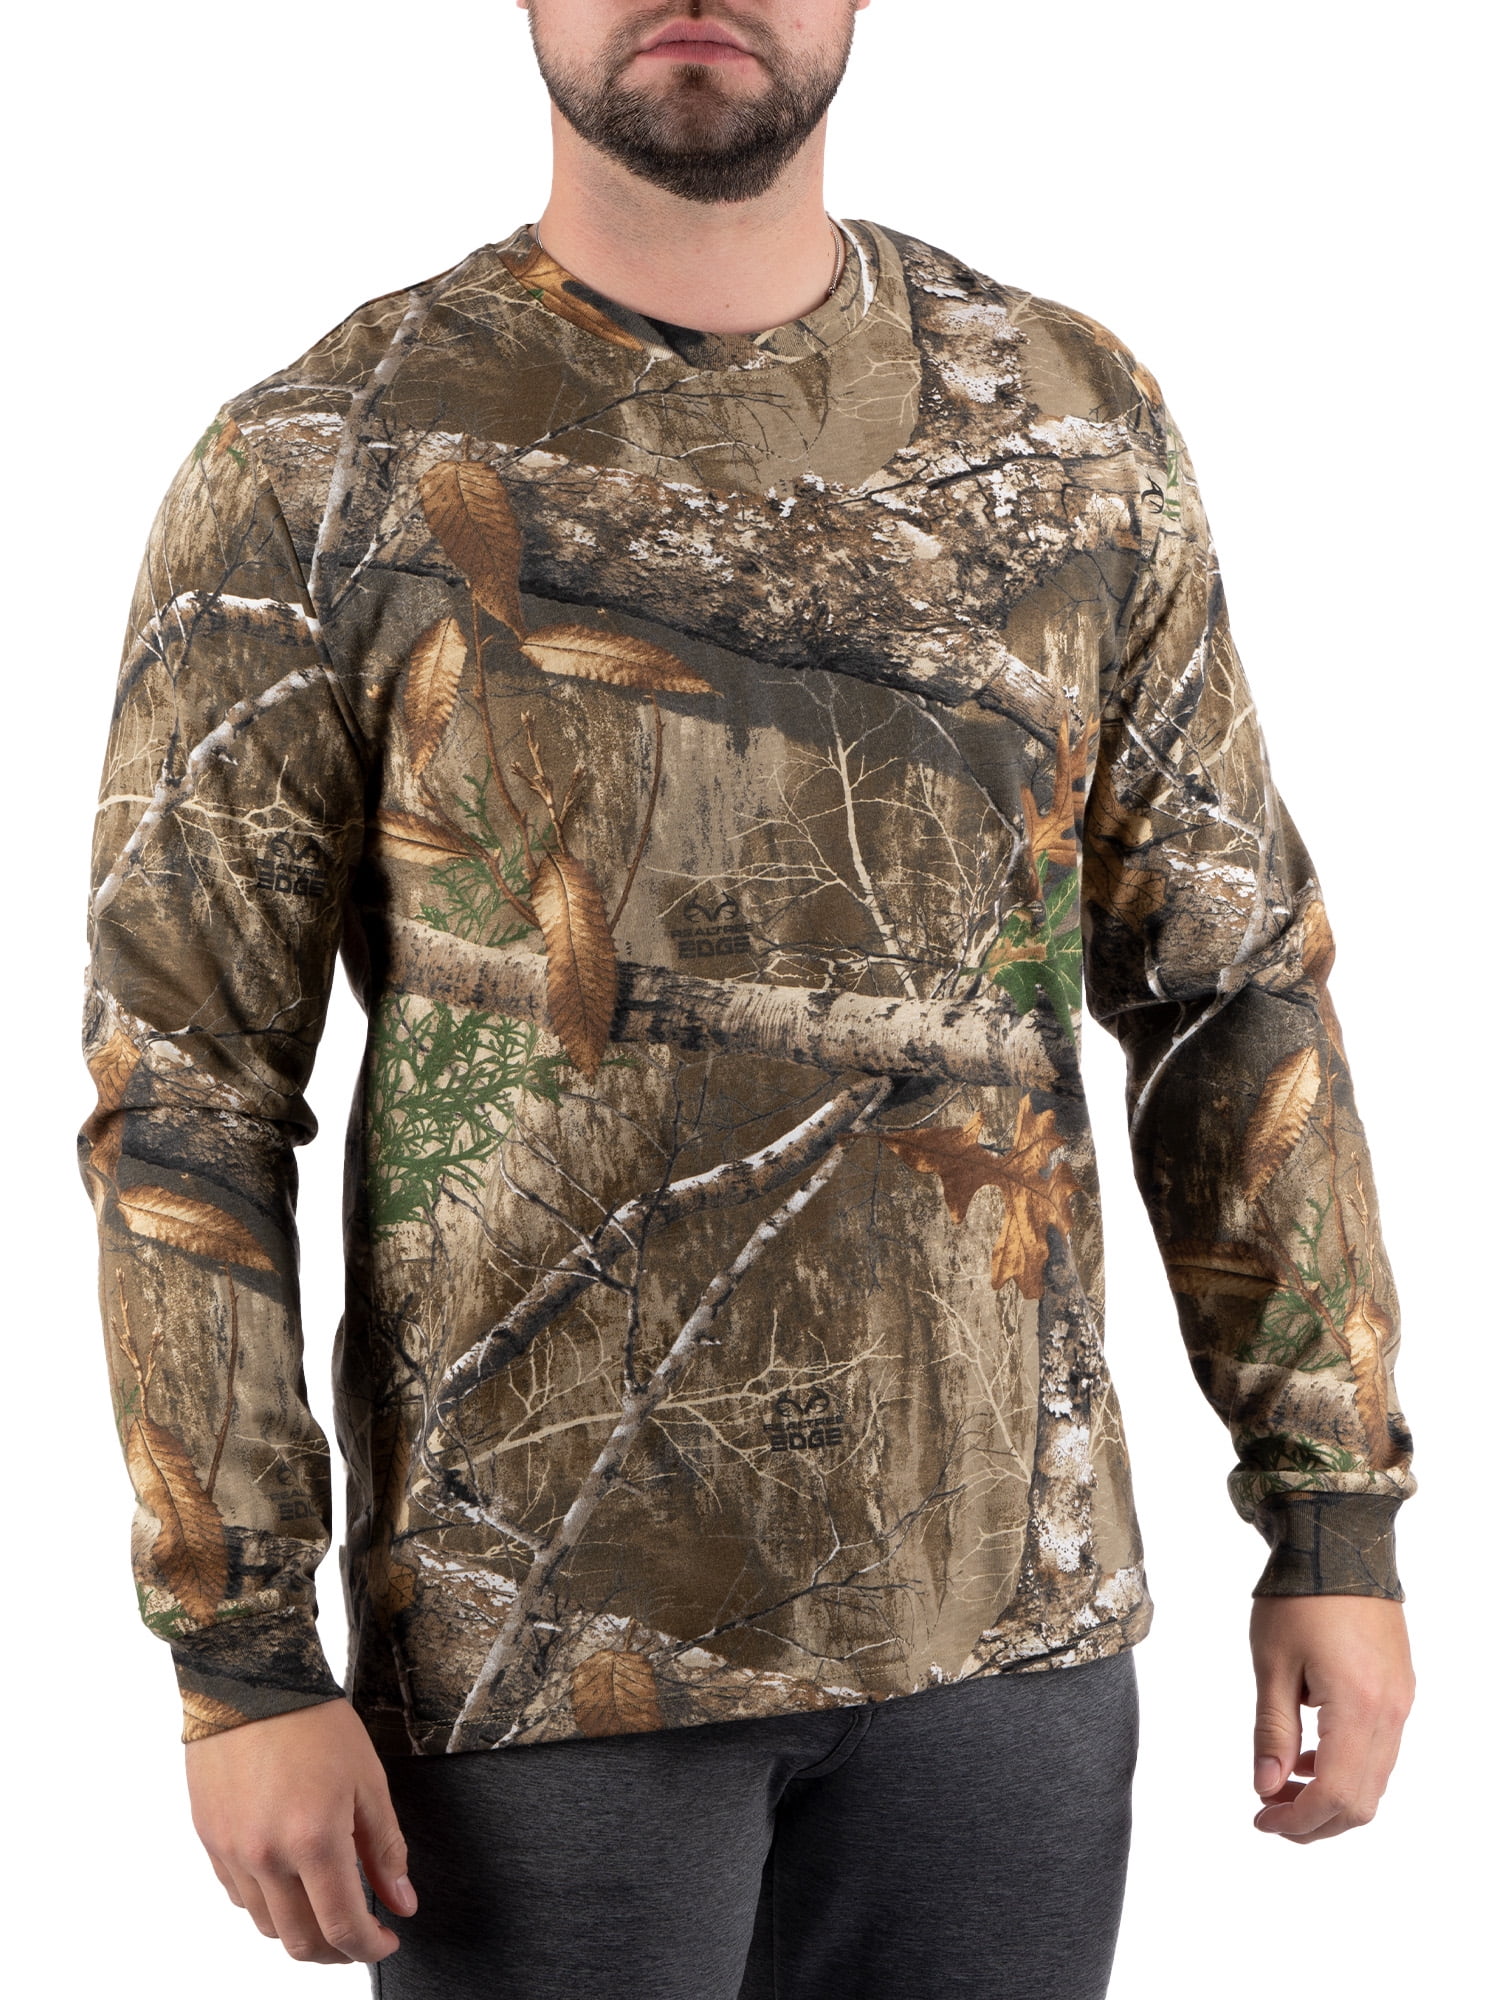 Men's Long Sleeve Camo Tee Scent Control Cotton Shirt by Realtree ...